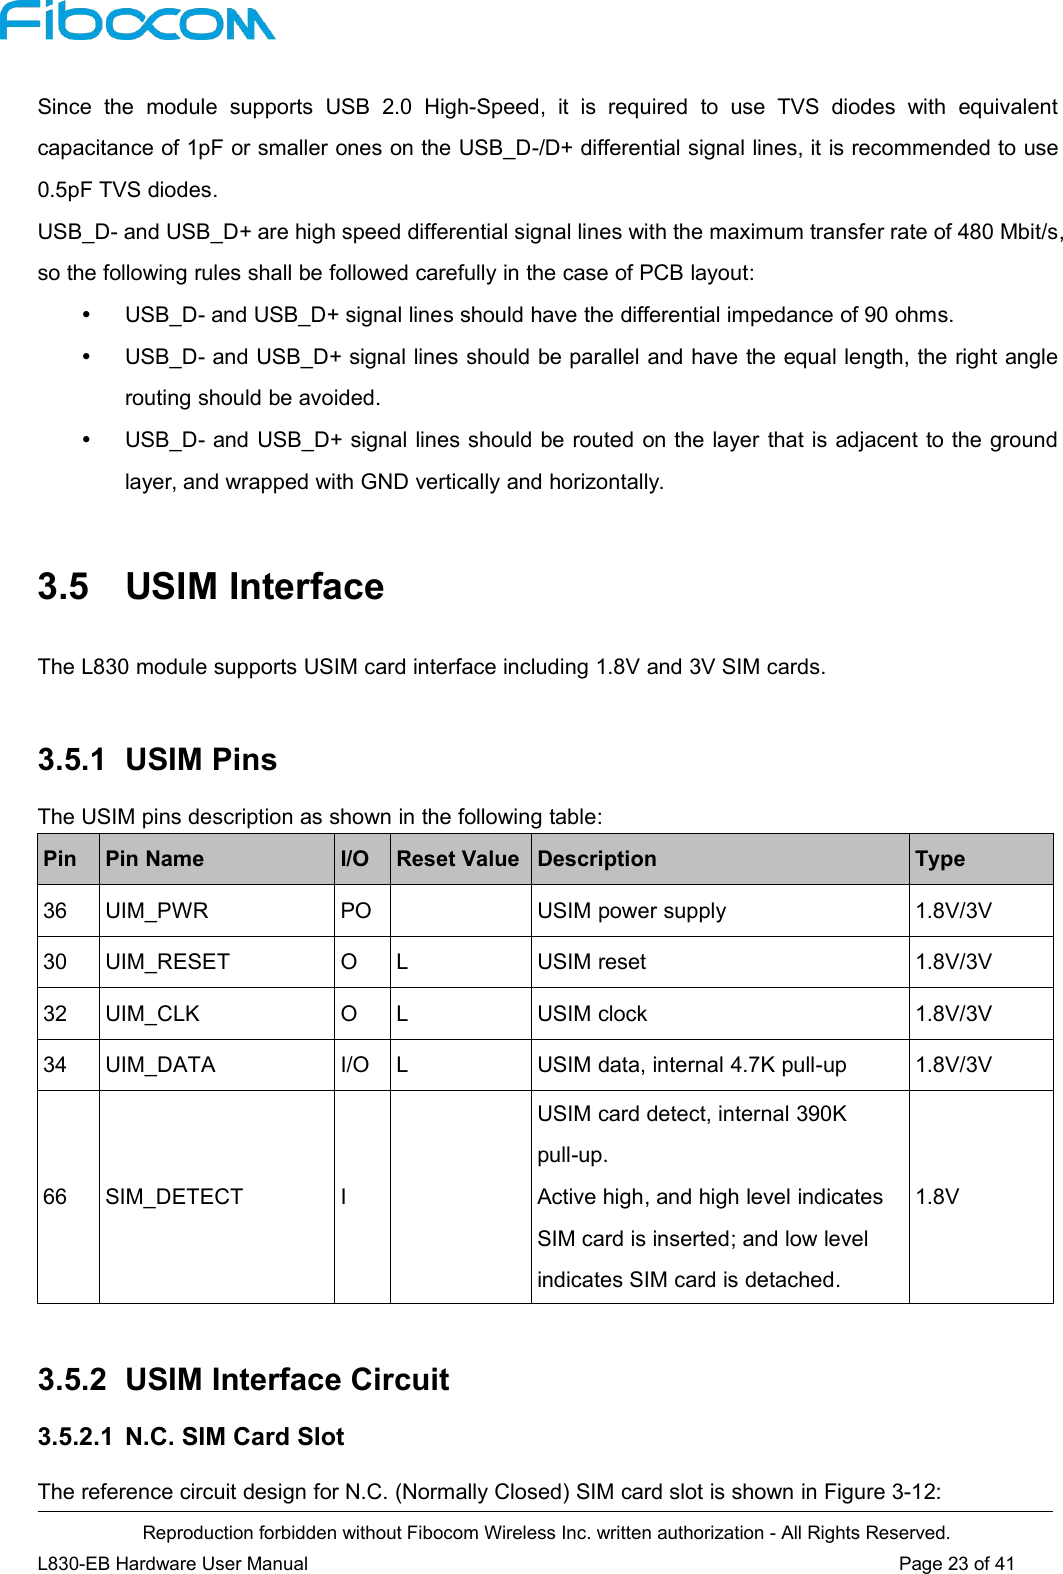 Reproduction forbidden without Fibocom Wireless Inc. written authorization - All Rights Reserved.L830-EB Hardware User Manual Page 23 of 41Since the module supports USB 2.0 High-Speed, it is required to use TVS diodes with equivalentcapacitance of 1pF or smaller ones on the USB_D-/D+ differential signal lines, it is recommended to use0.5pF TVS diodes.USB_D- and USB_D+ are high speed differential signal lines with the maximum transfer rate of 480 Mbit/s,so the following rules shall be followed carefully in the case of PCB layout:USB_D- and USB_D+ signal lines should have the differential impedance of 90 ohms.USB_D- and USB_D+ signal lines should be parallel and have the equal length, the right anglerouting should be avoided.USB_D- and USB_D+ signal lines should be routed on the layer that is adjacent to the groundlayer, and wrapped with GND vertically and horizontally.3.5 USIM InterfaceThe L830 module supports USIM card interface including 1.8V and 3V SIM cards.3.5.1 USIM PinsThe USIM pins description as shown in the following table:PinPin NameI/OReset ValueDescriptionType36UIM_PWRPOUSIM power supply1.8V/3V30UIM_RESETOLUSIM reset1.8V/3V32UIM_CLKOLUSIM clock1.8V/3V34UIM_DATAI/OLUSIM data, internal 4.7K pull-up1.8V/3V66SIM_DETECTIUSIM card detect, internal 390Kpull-up.Active high, and high level indicatesSIM card is inserted; and low levelindicates SIM card is detached.1.8V3.5.2 USIM Interface Circuit3.5.2.1 N.C. SIM Card SlotThe reference circuit design for N.C. (Normally Closed) SIM card slot is shown in Figure 3-12: